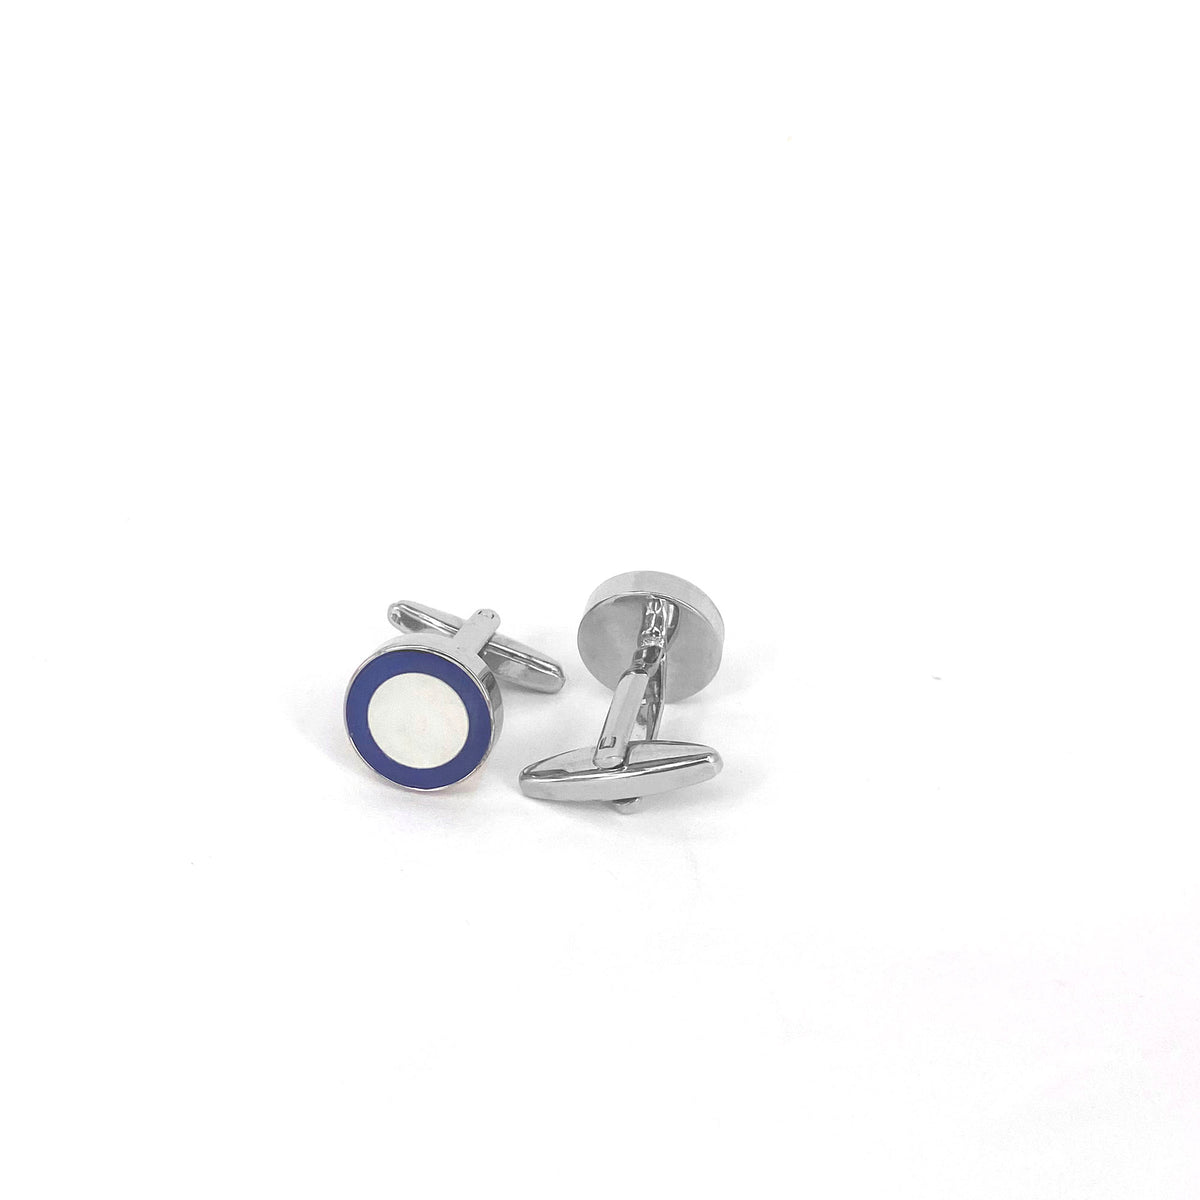 Silver round Cufflinks with Blue and White circle (Small size)